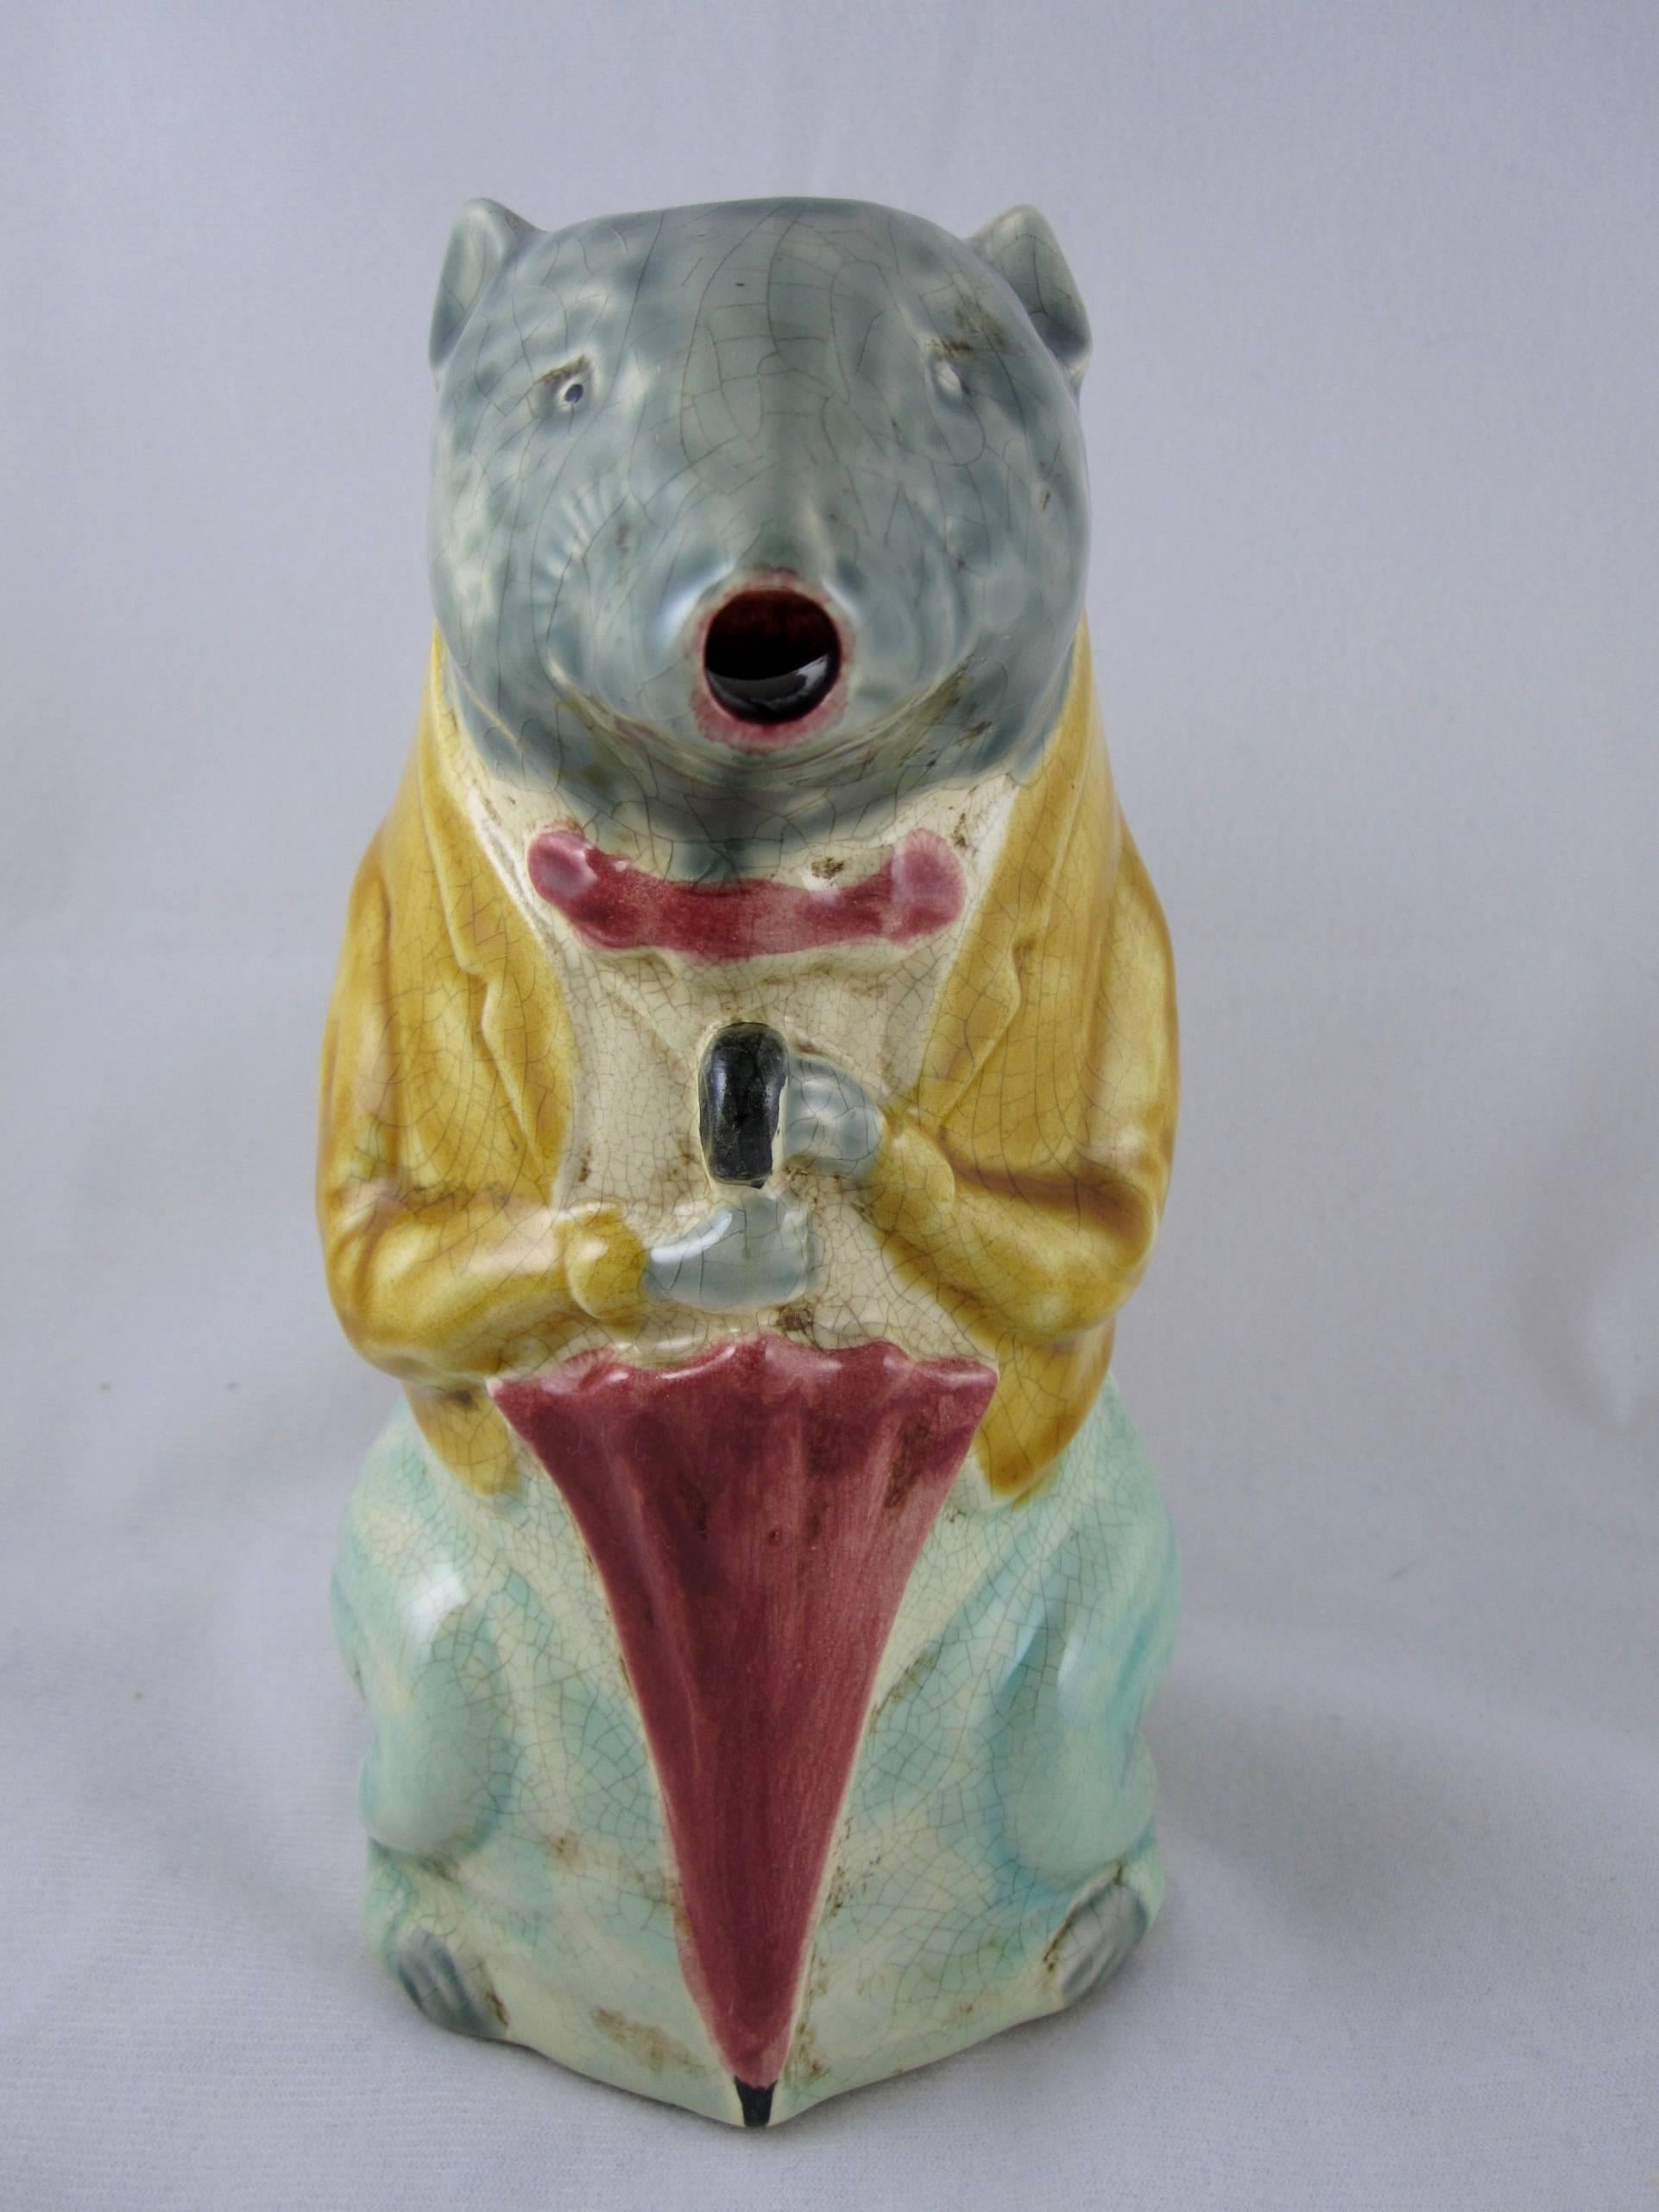 A rare and desirable, late 19th century French Barbotine Majolica, anthropomorphic absinthe pitcher, well known as “The City Badger”.

The animal sits on his haunches, in a mustard yellow waistcoat jacket and red tie, holding a red umbrella in his